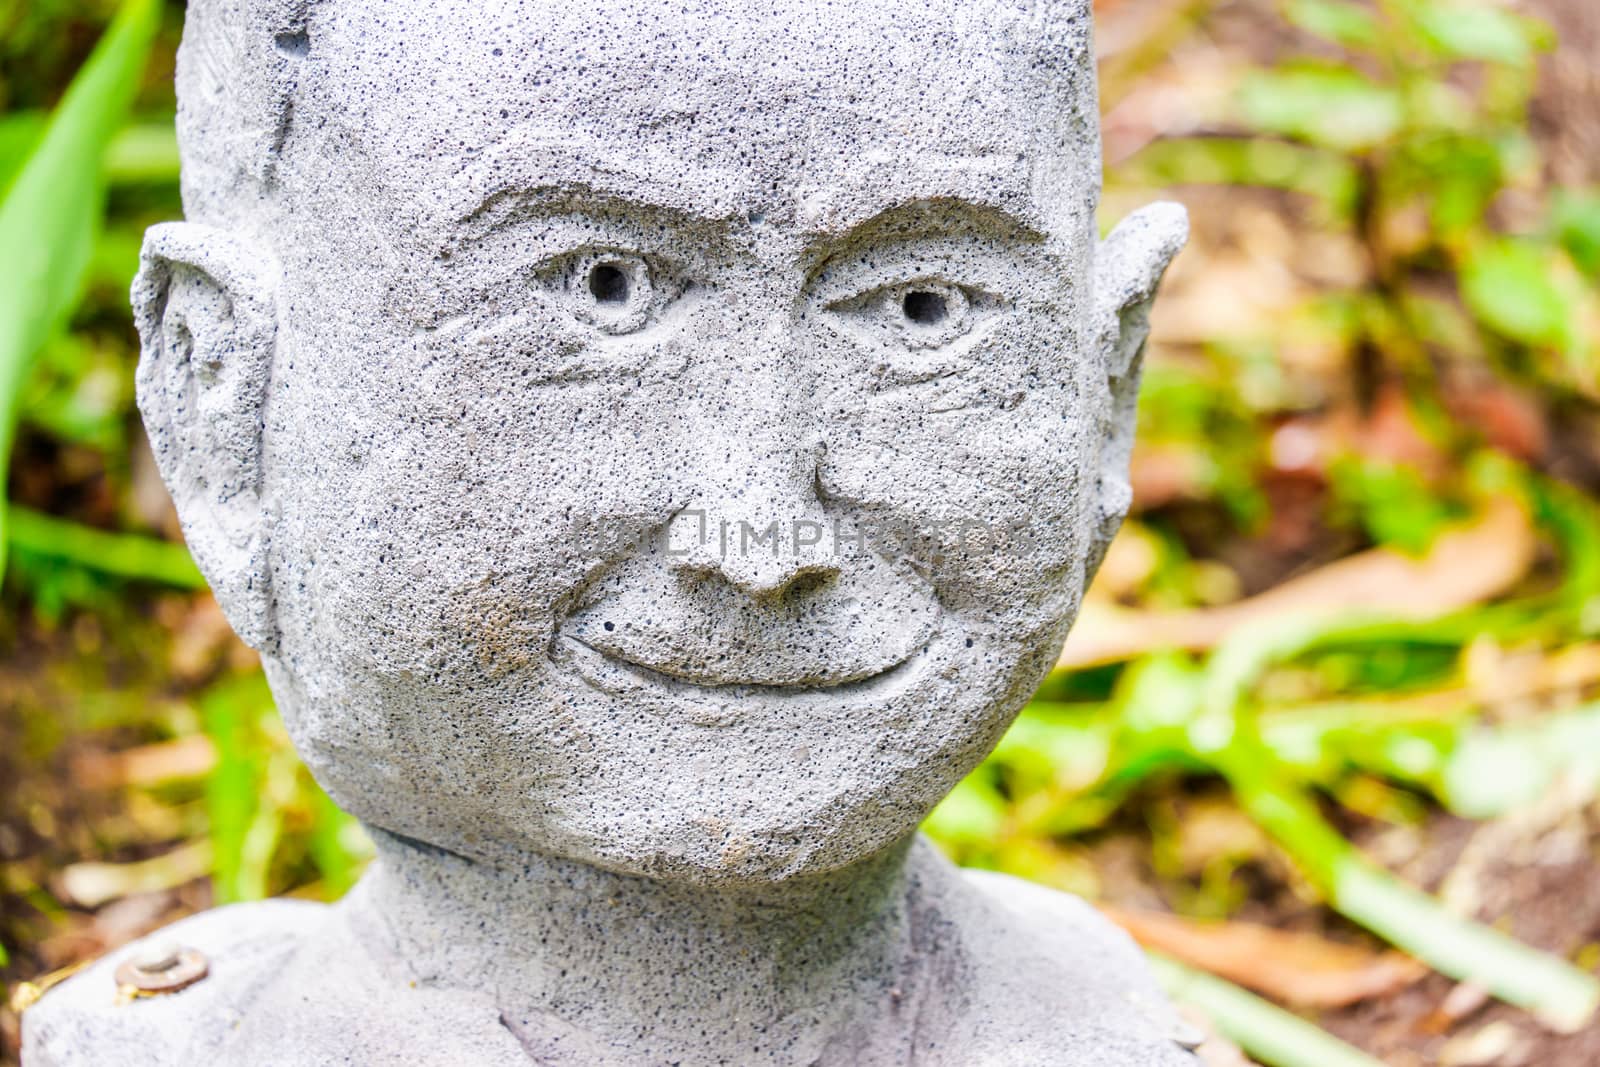 Details of the cute stone doll face that adorned the garden. Good looking monk stone face with sunshine on.